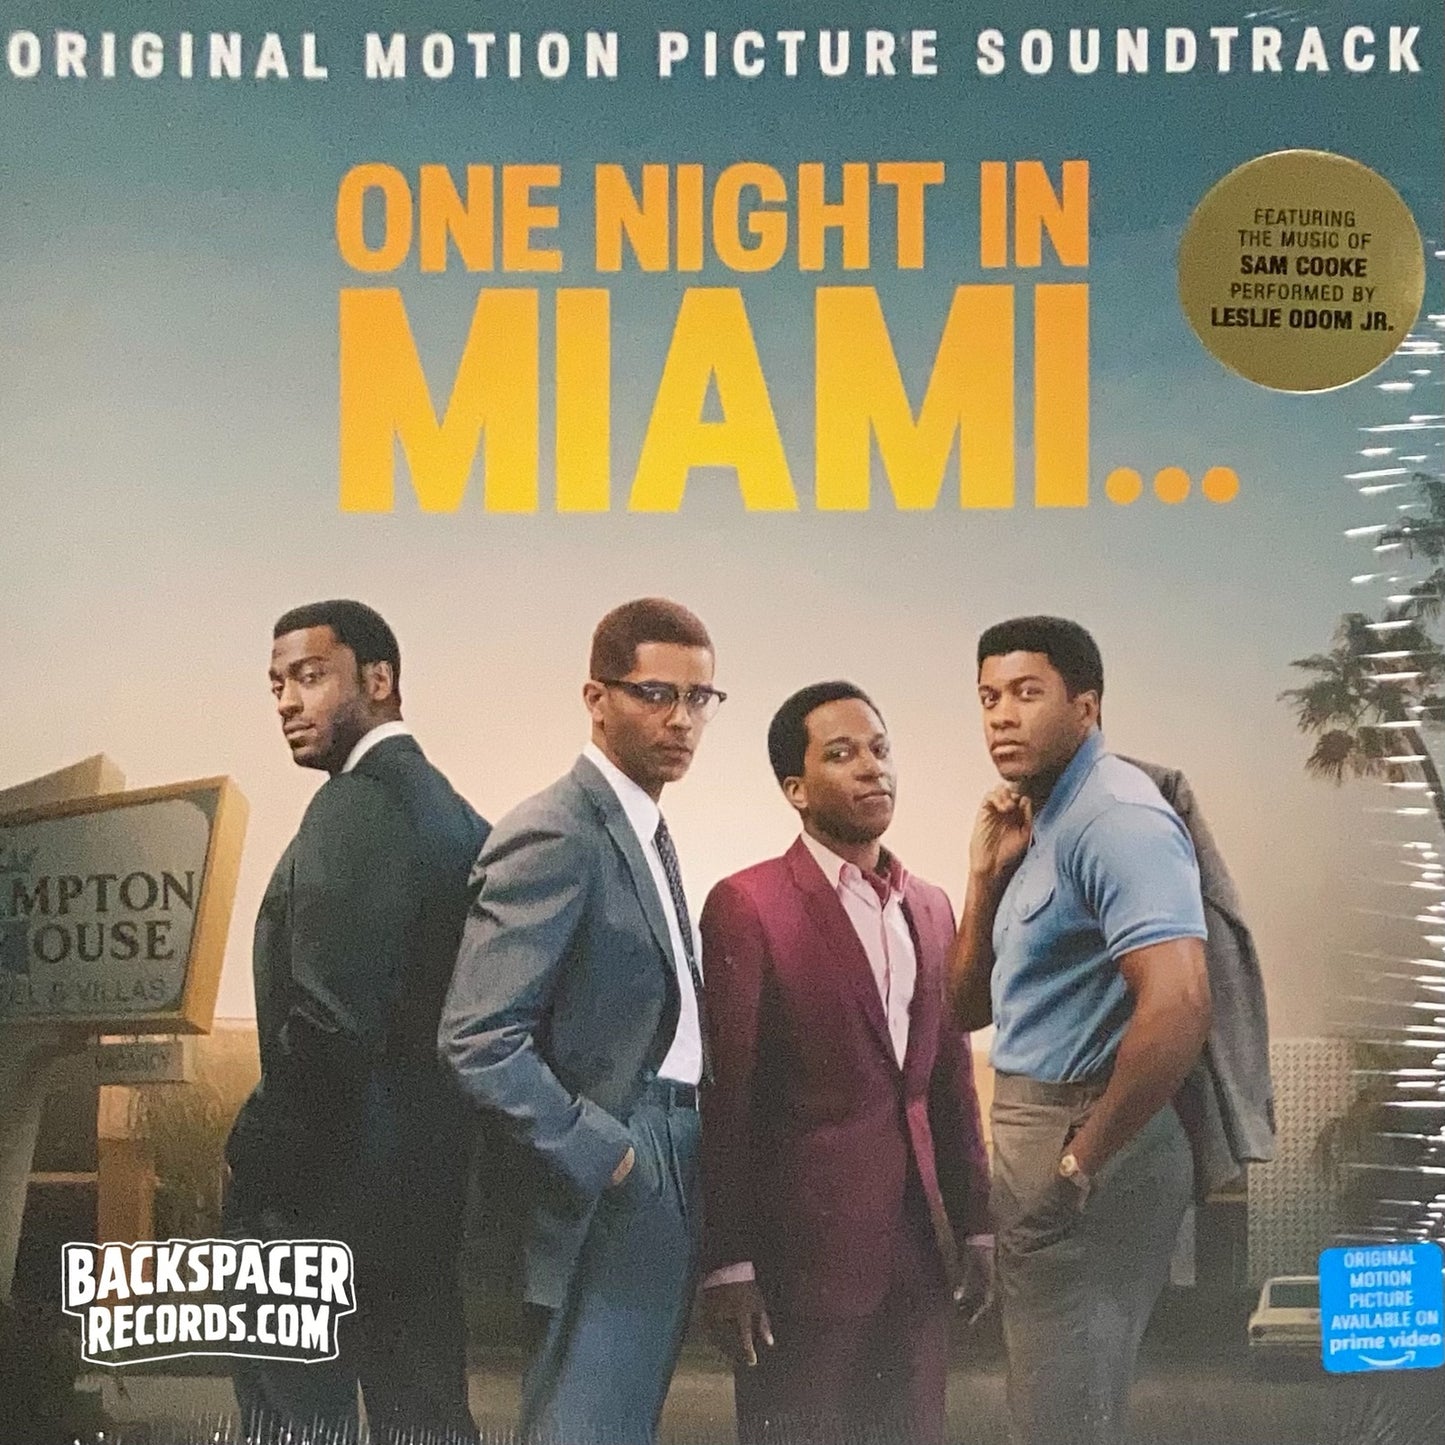 One Night in Miami... Original Motion Picture Soundtrack - Various Artists LP (Sealed)